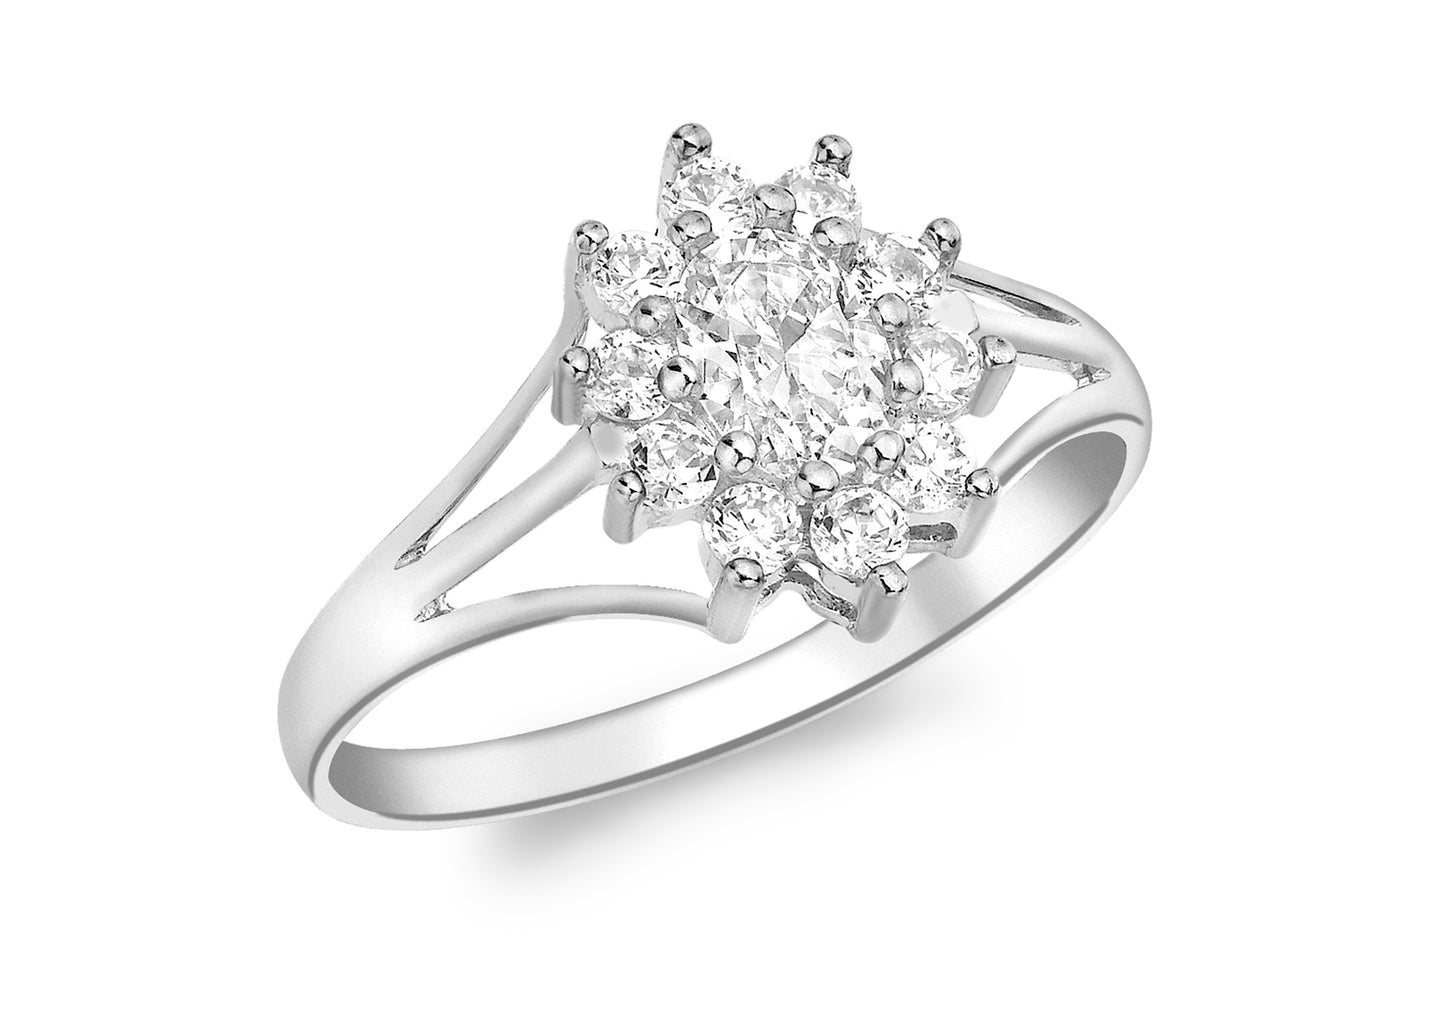 9ct White Gold Cubic Zirconia Cluster Ring